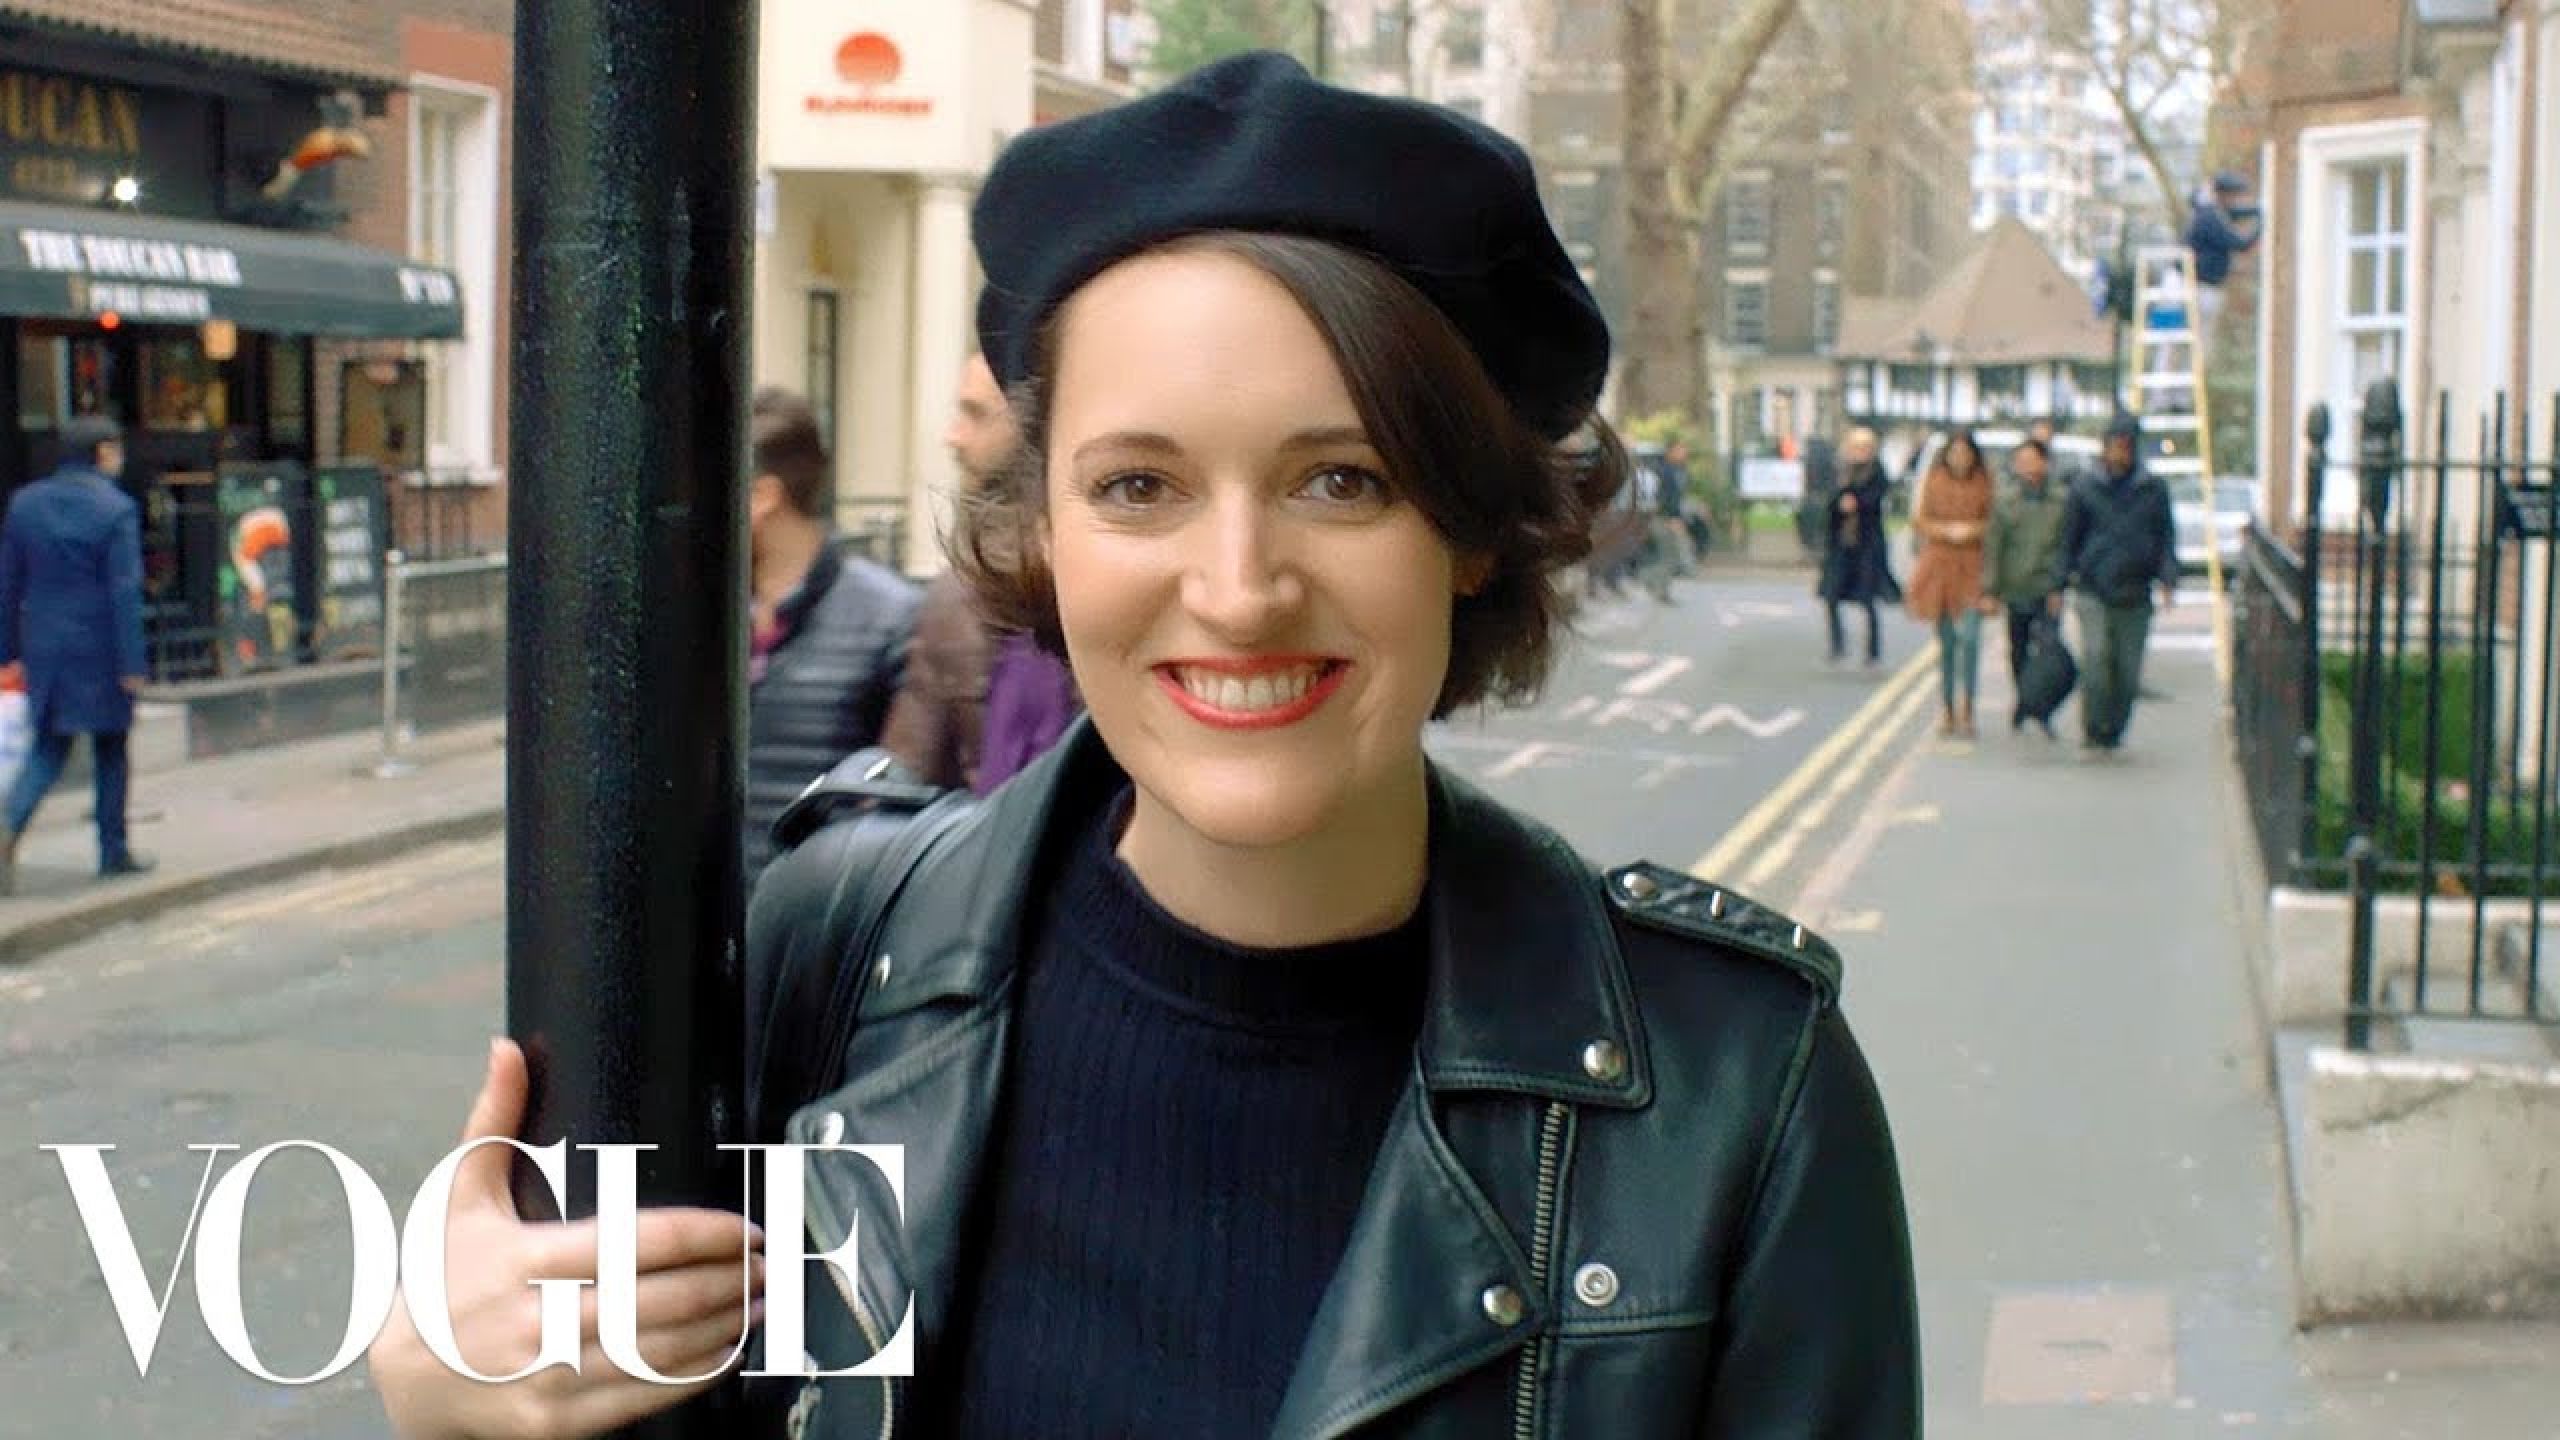 Black French Cap worn by Phoebe Waller-Bridge in 73 Questions With Phoebe W...